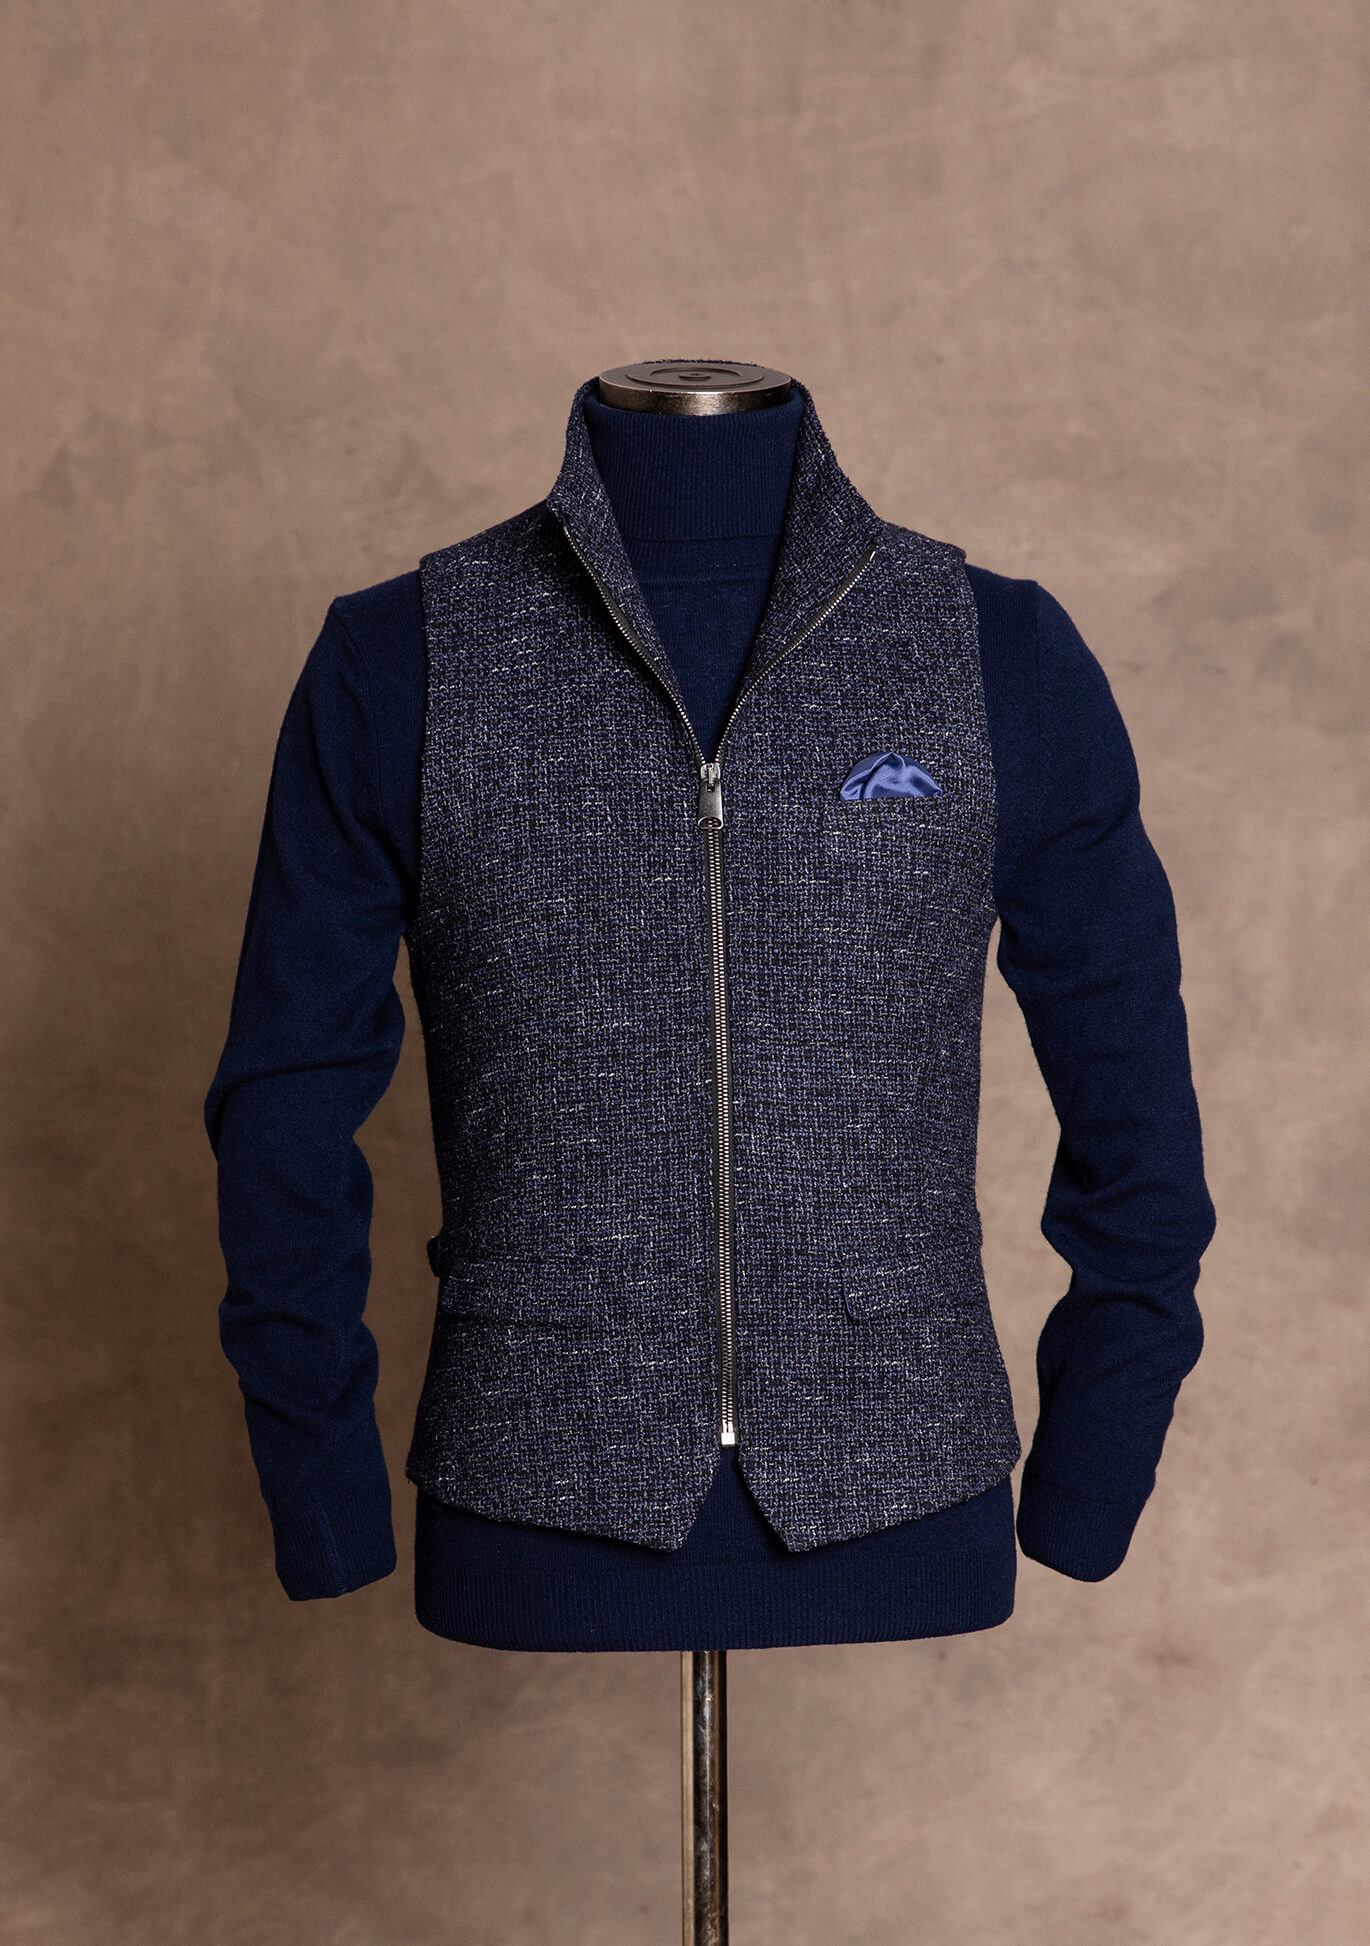 Fashionable, chic and casual men's vest gilet from DORNSCHILD with zipper made of the finest Italian fabric.